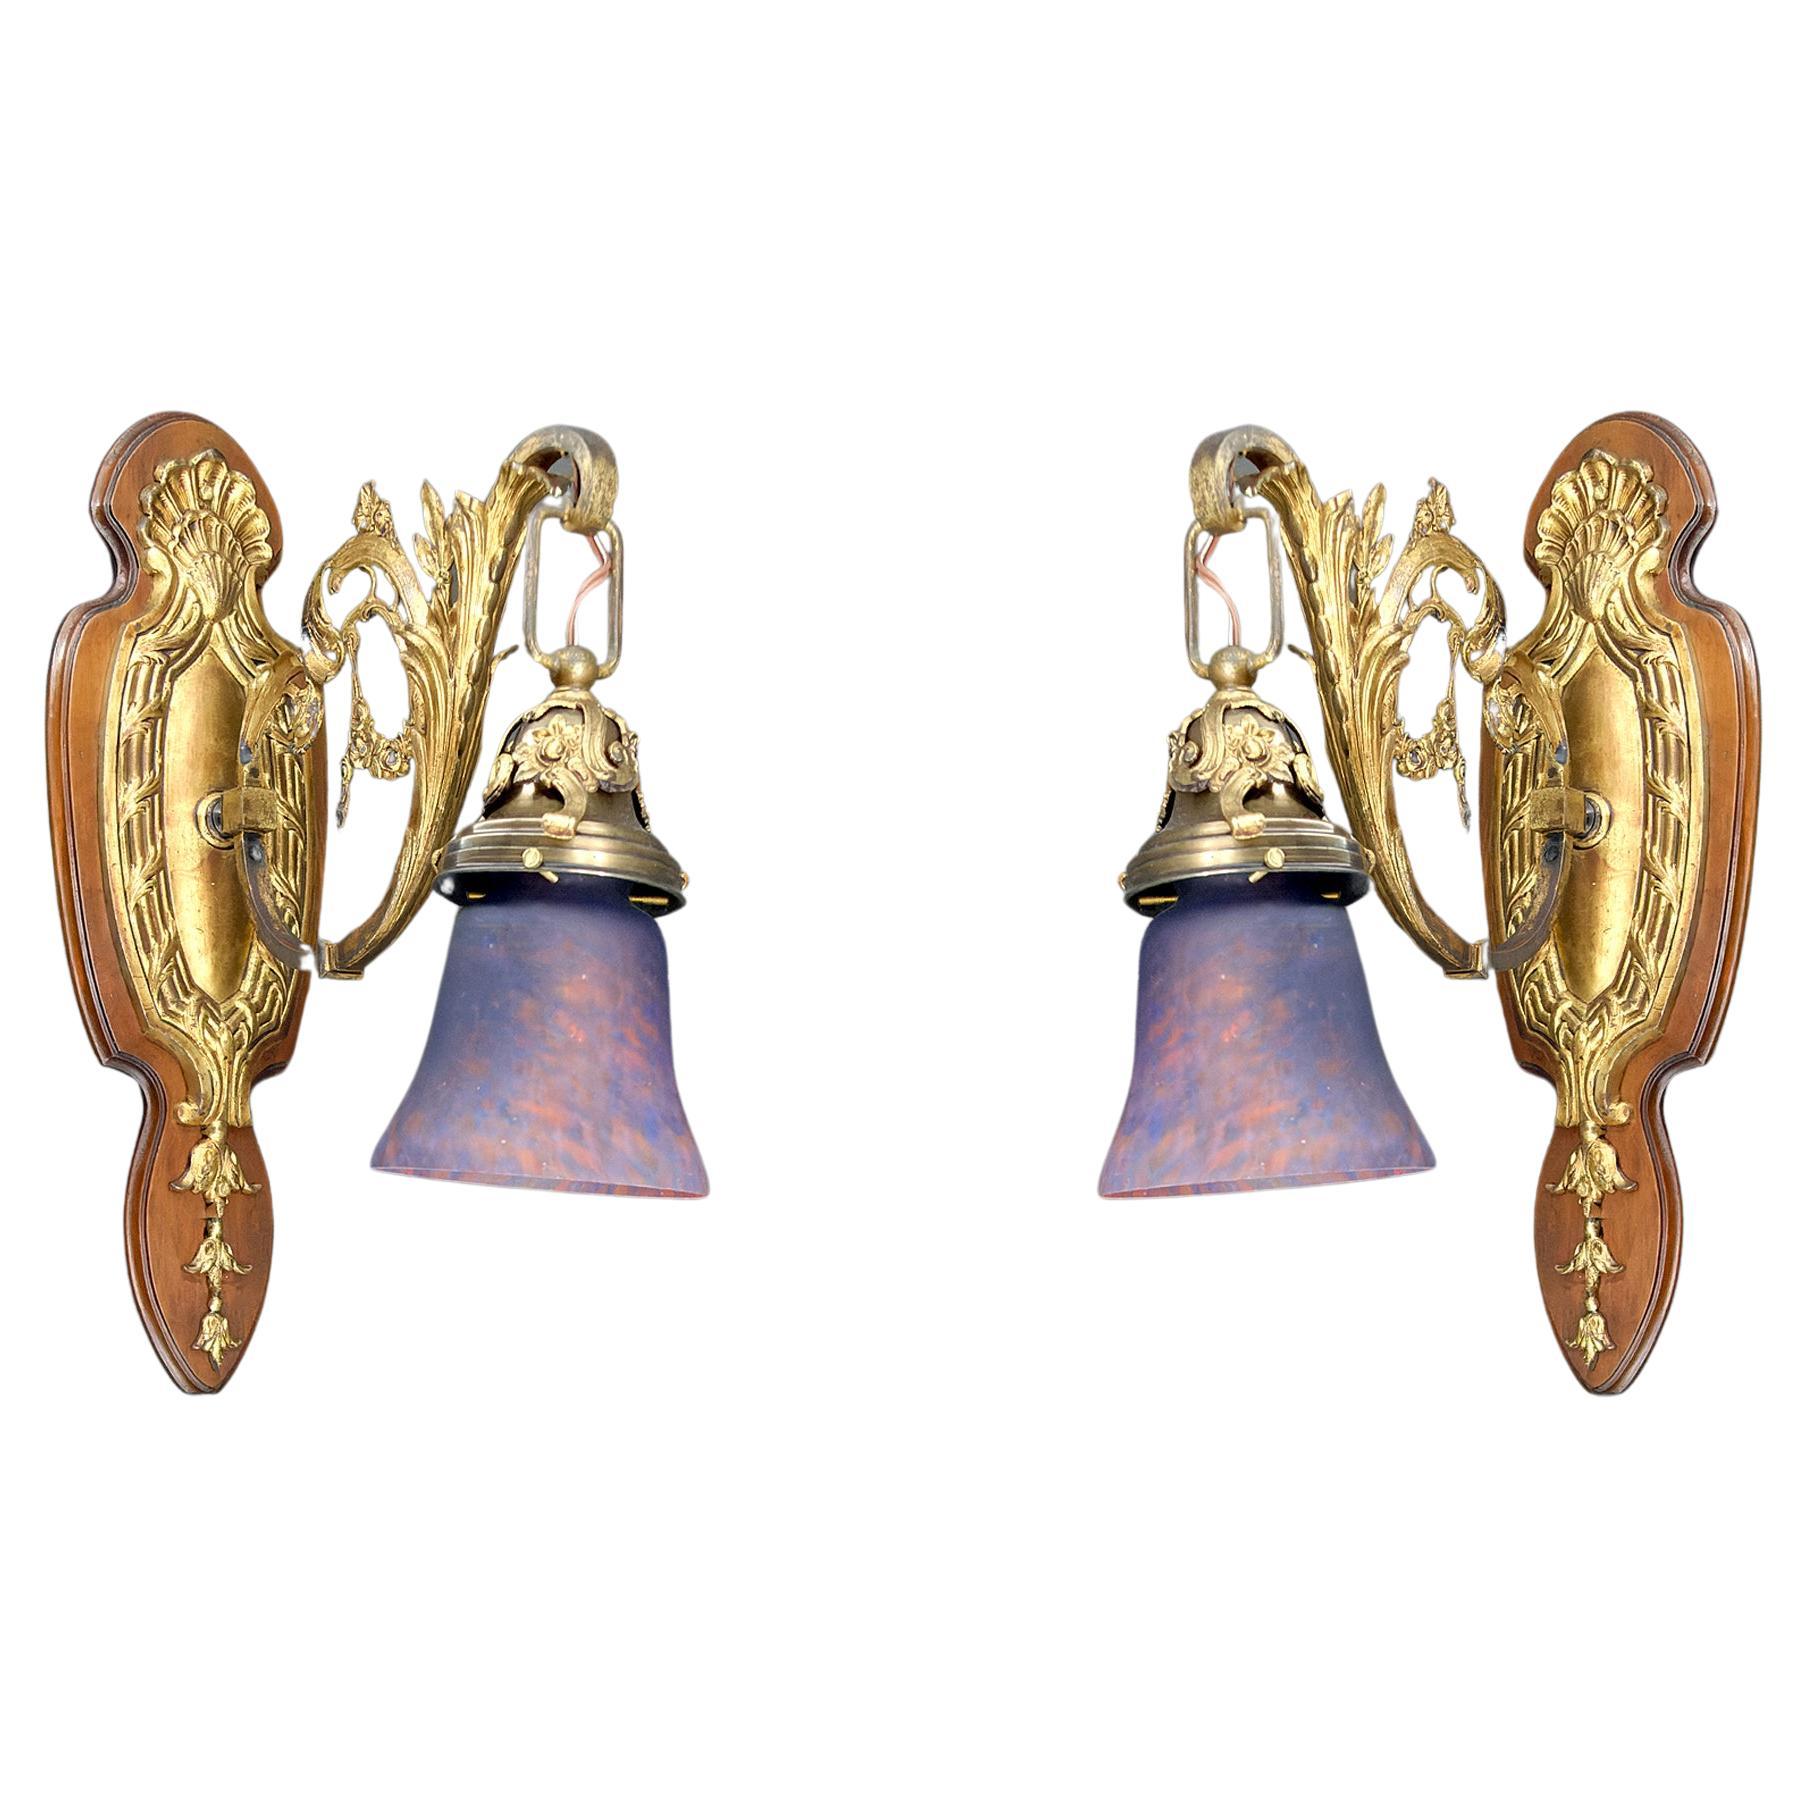 Pair of Rococo / Louis XV wall sconces in gilded bronze, walnut and glass tulips For Sale